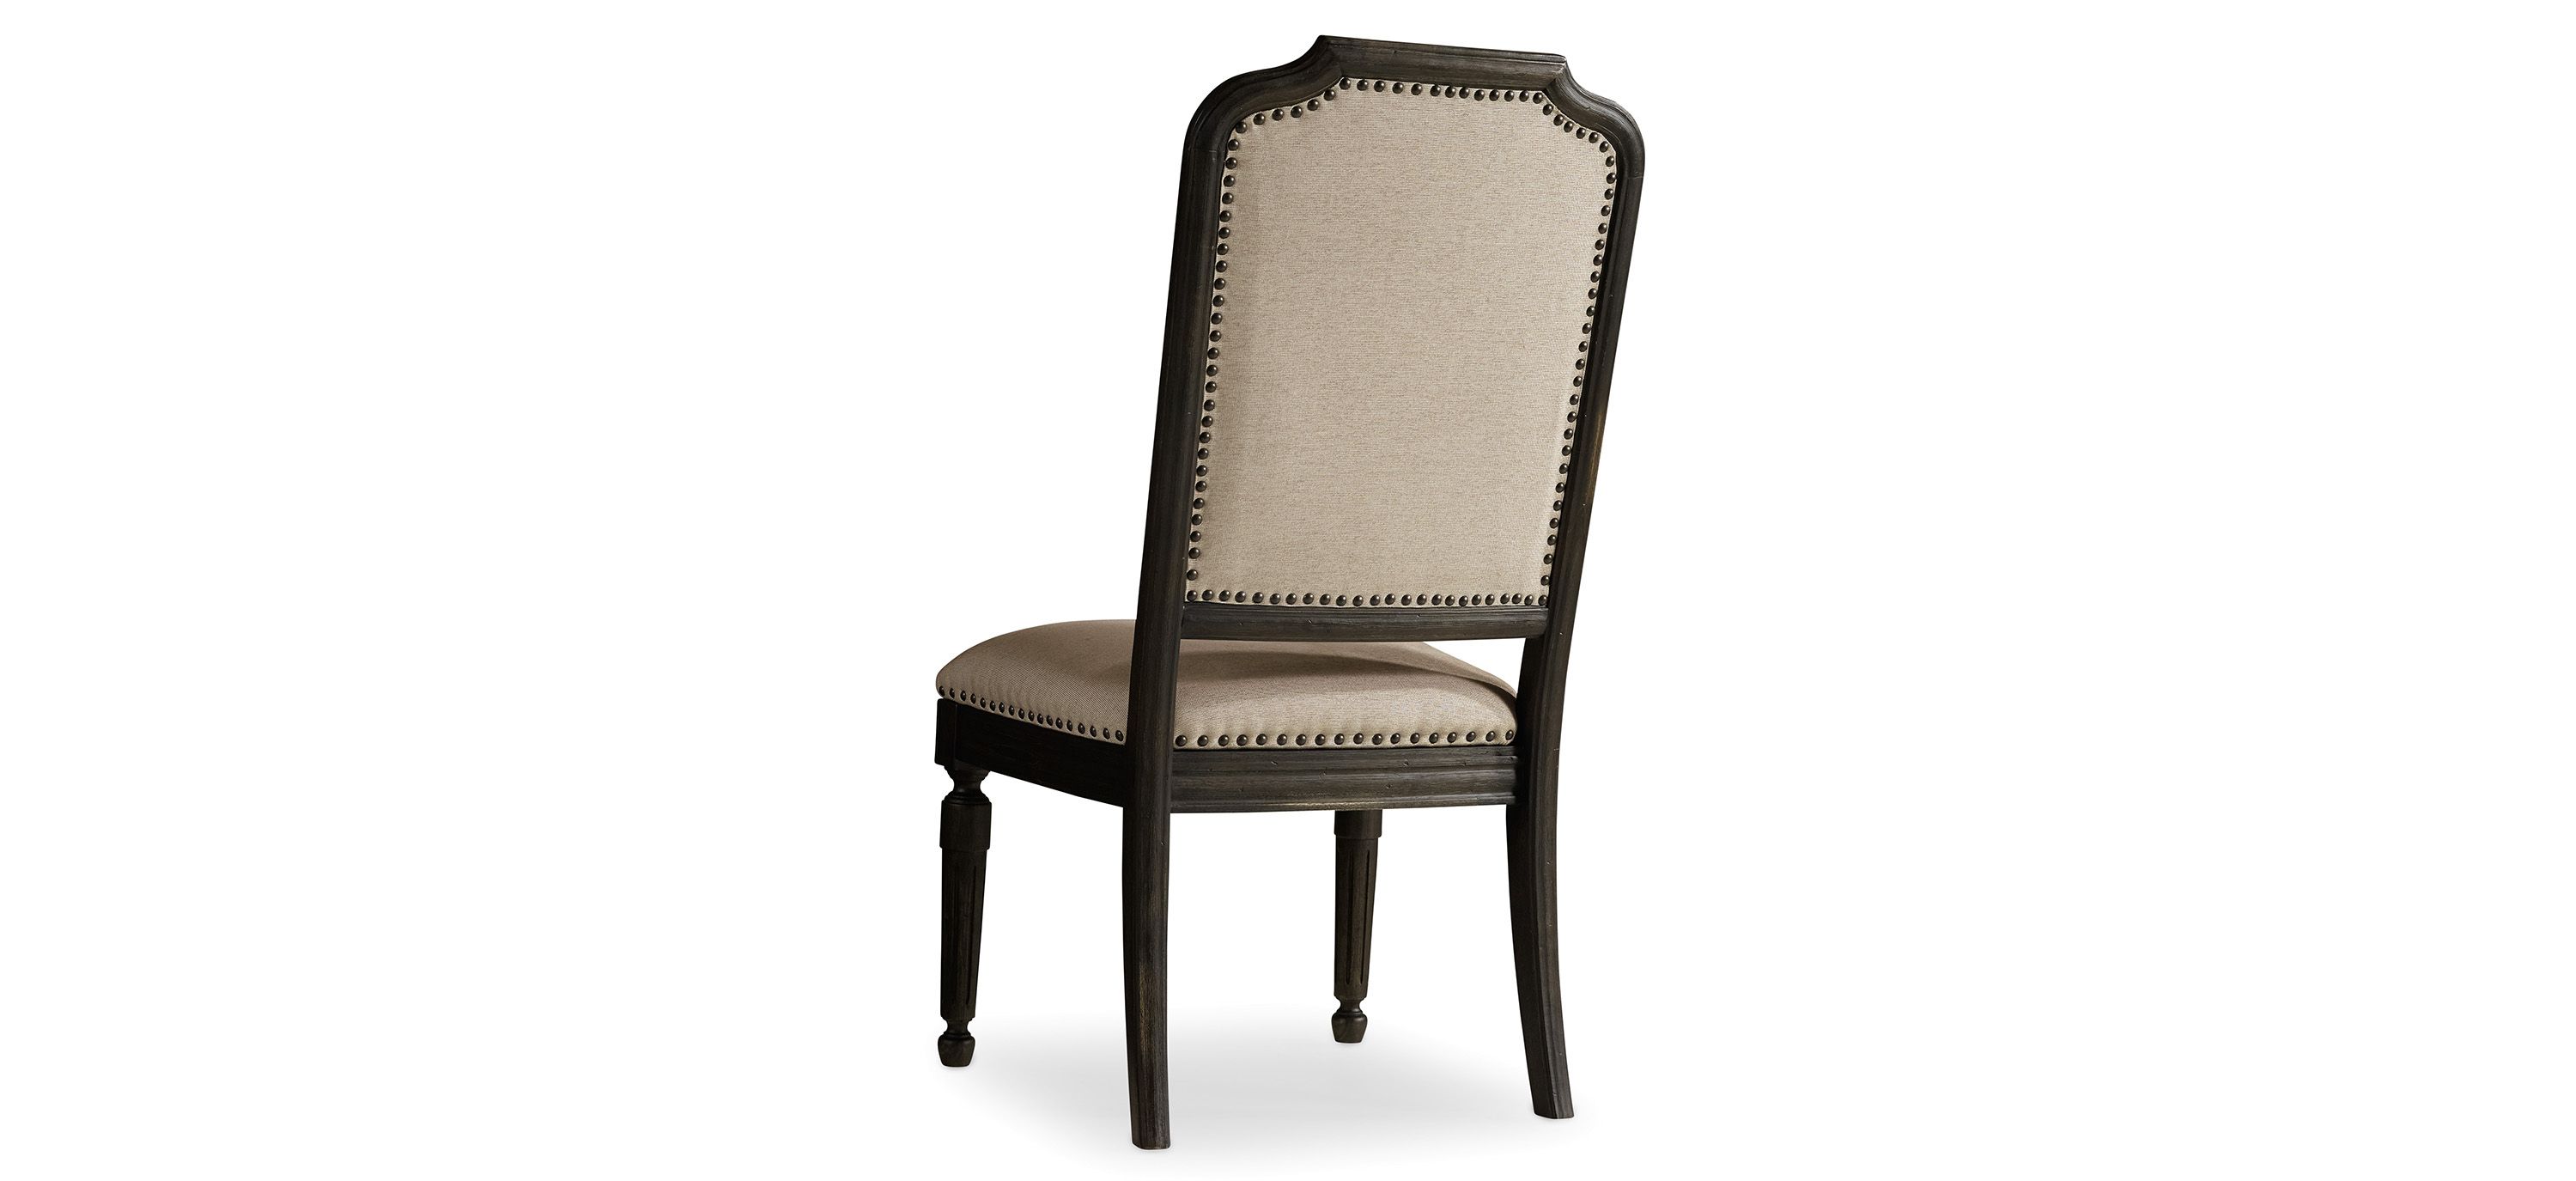 Corsica Upholstered Side Chair - Set of 2